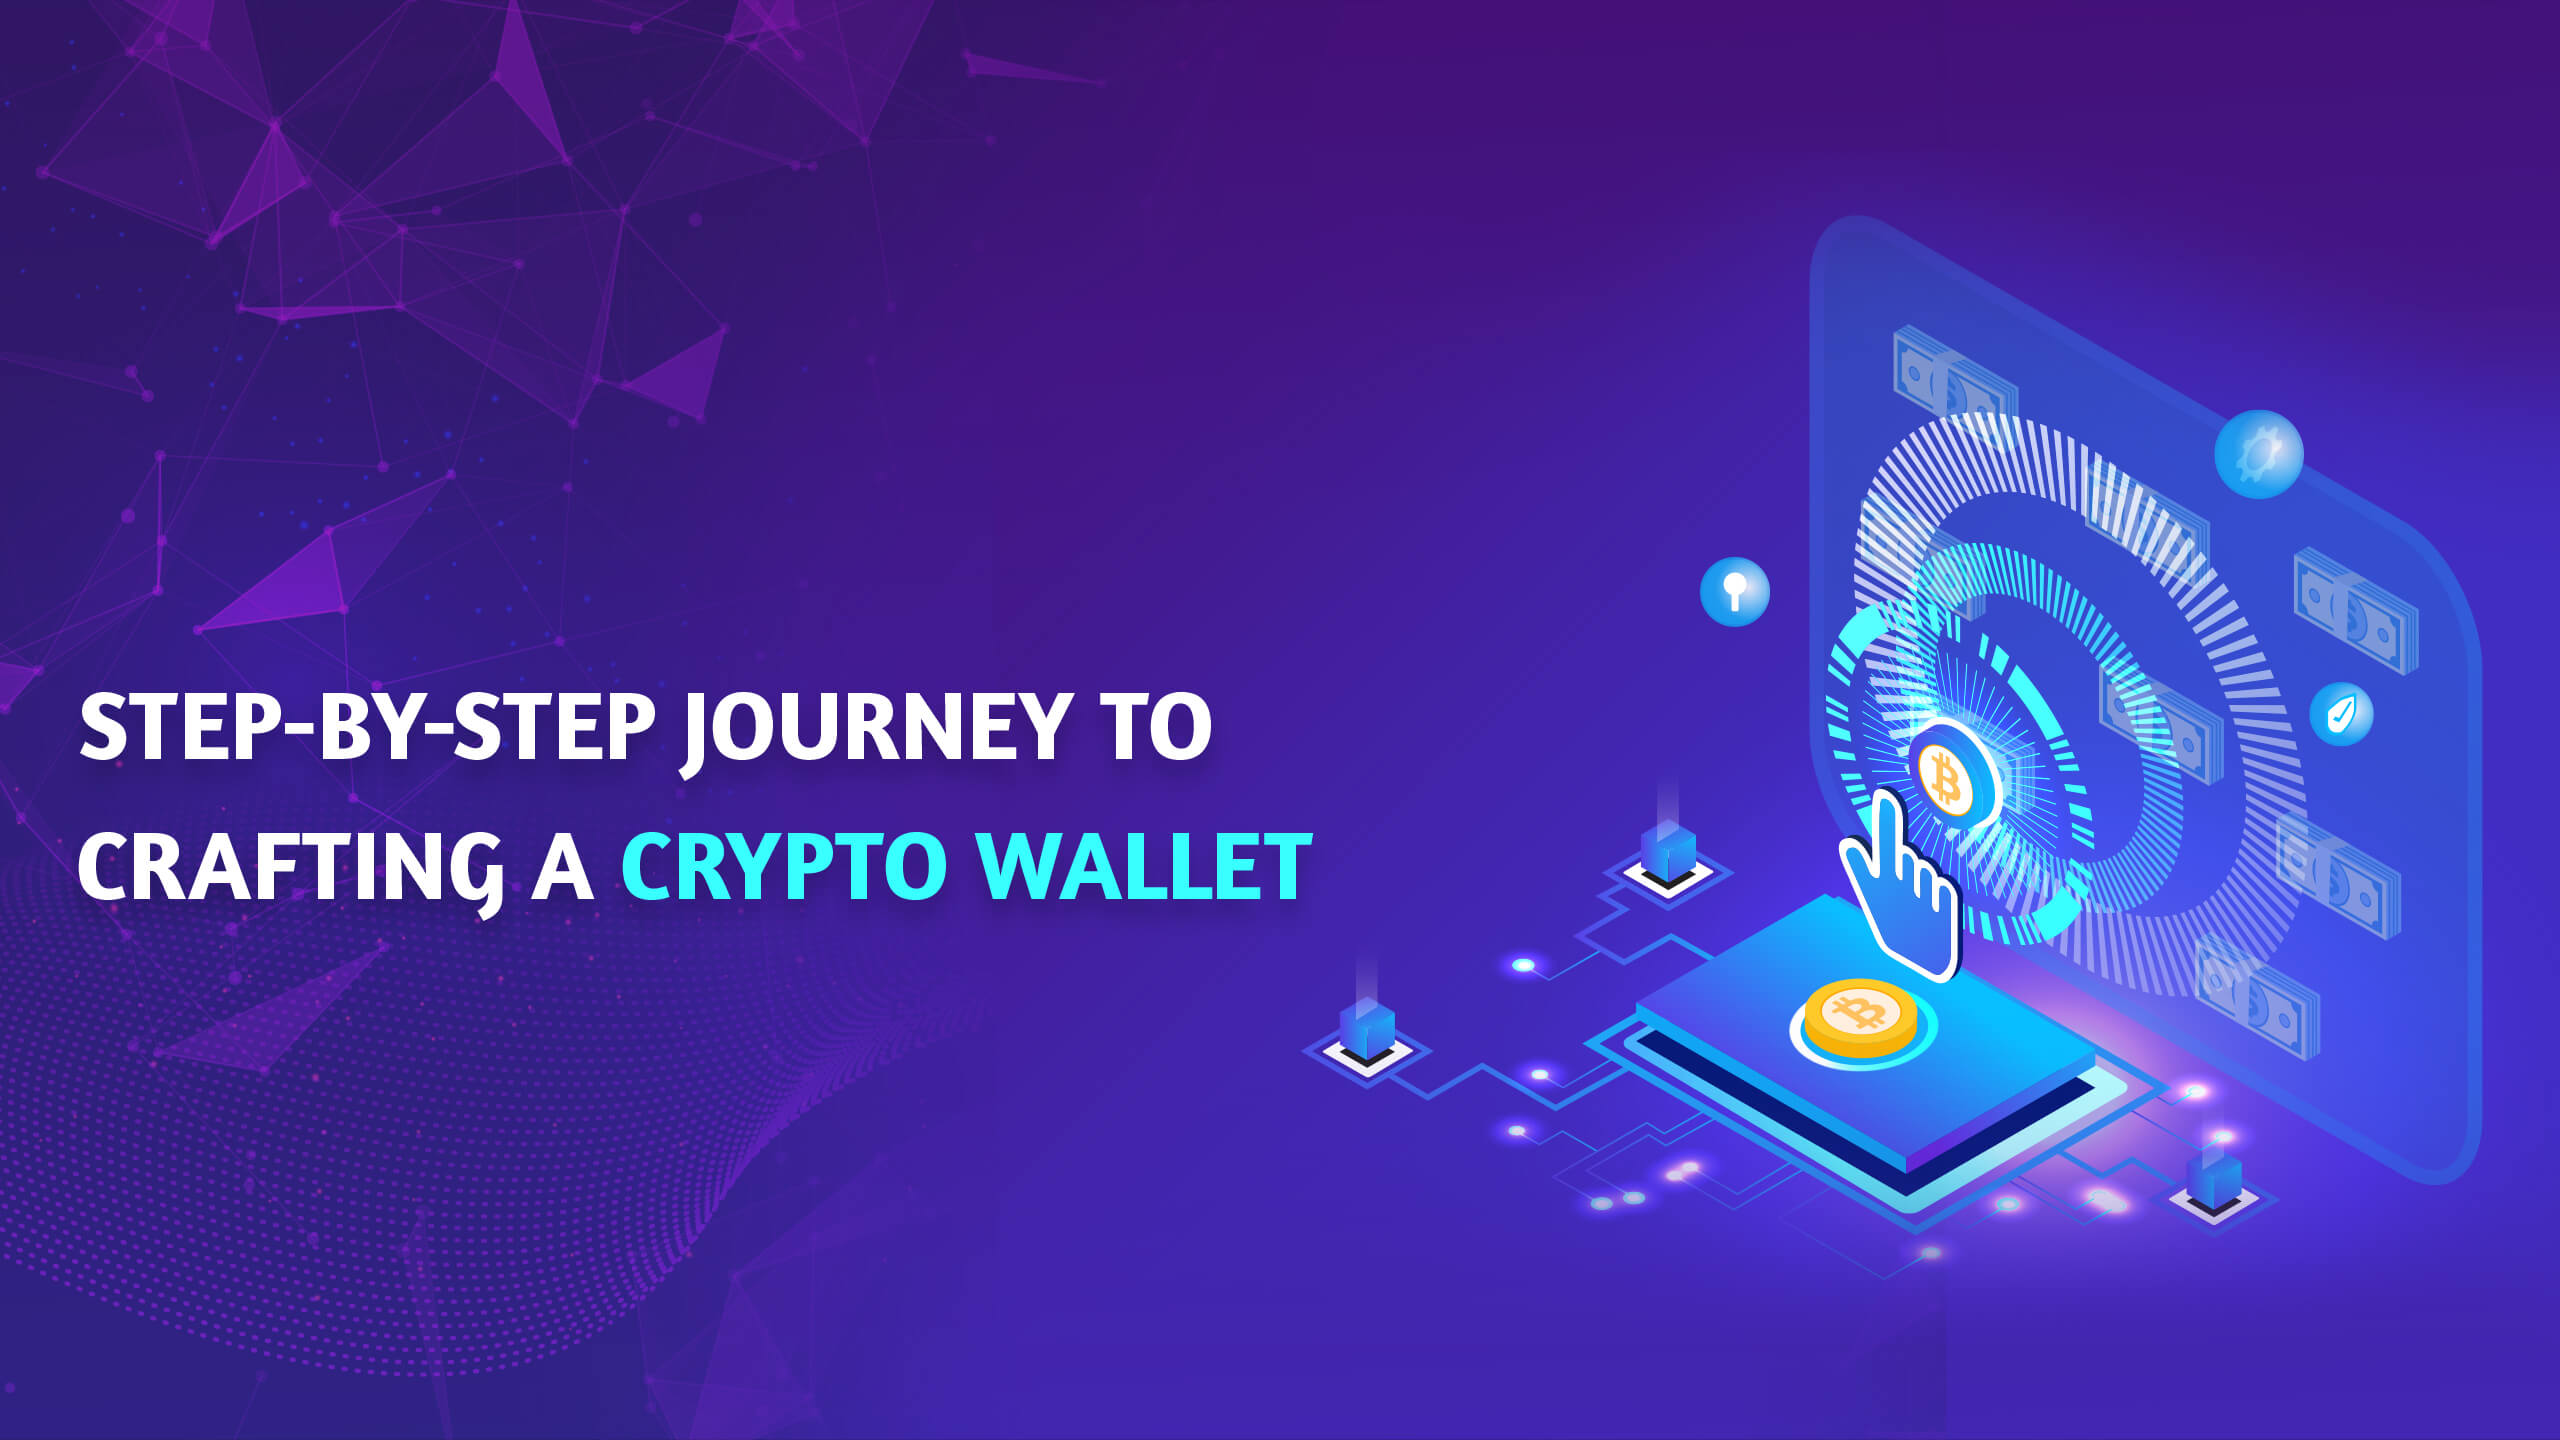 Step-by-Step Journey to Crafting a Crypto Wallet